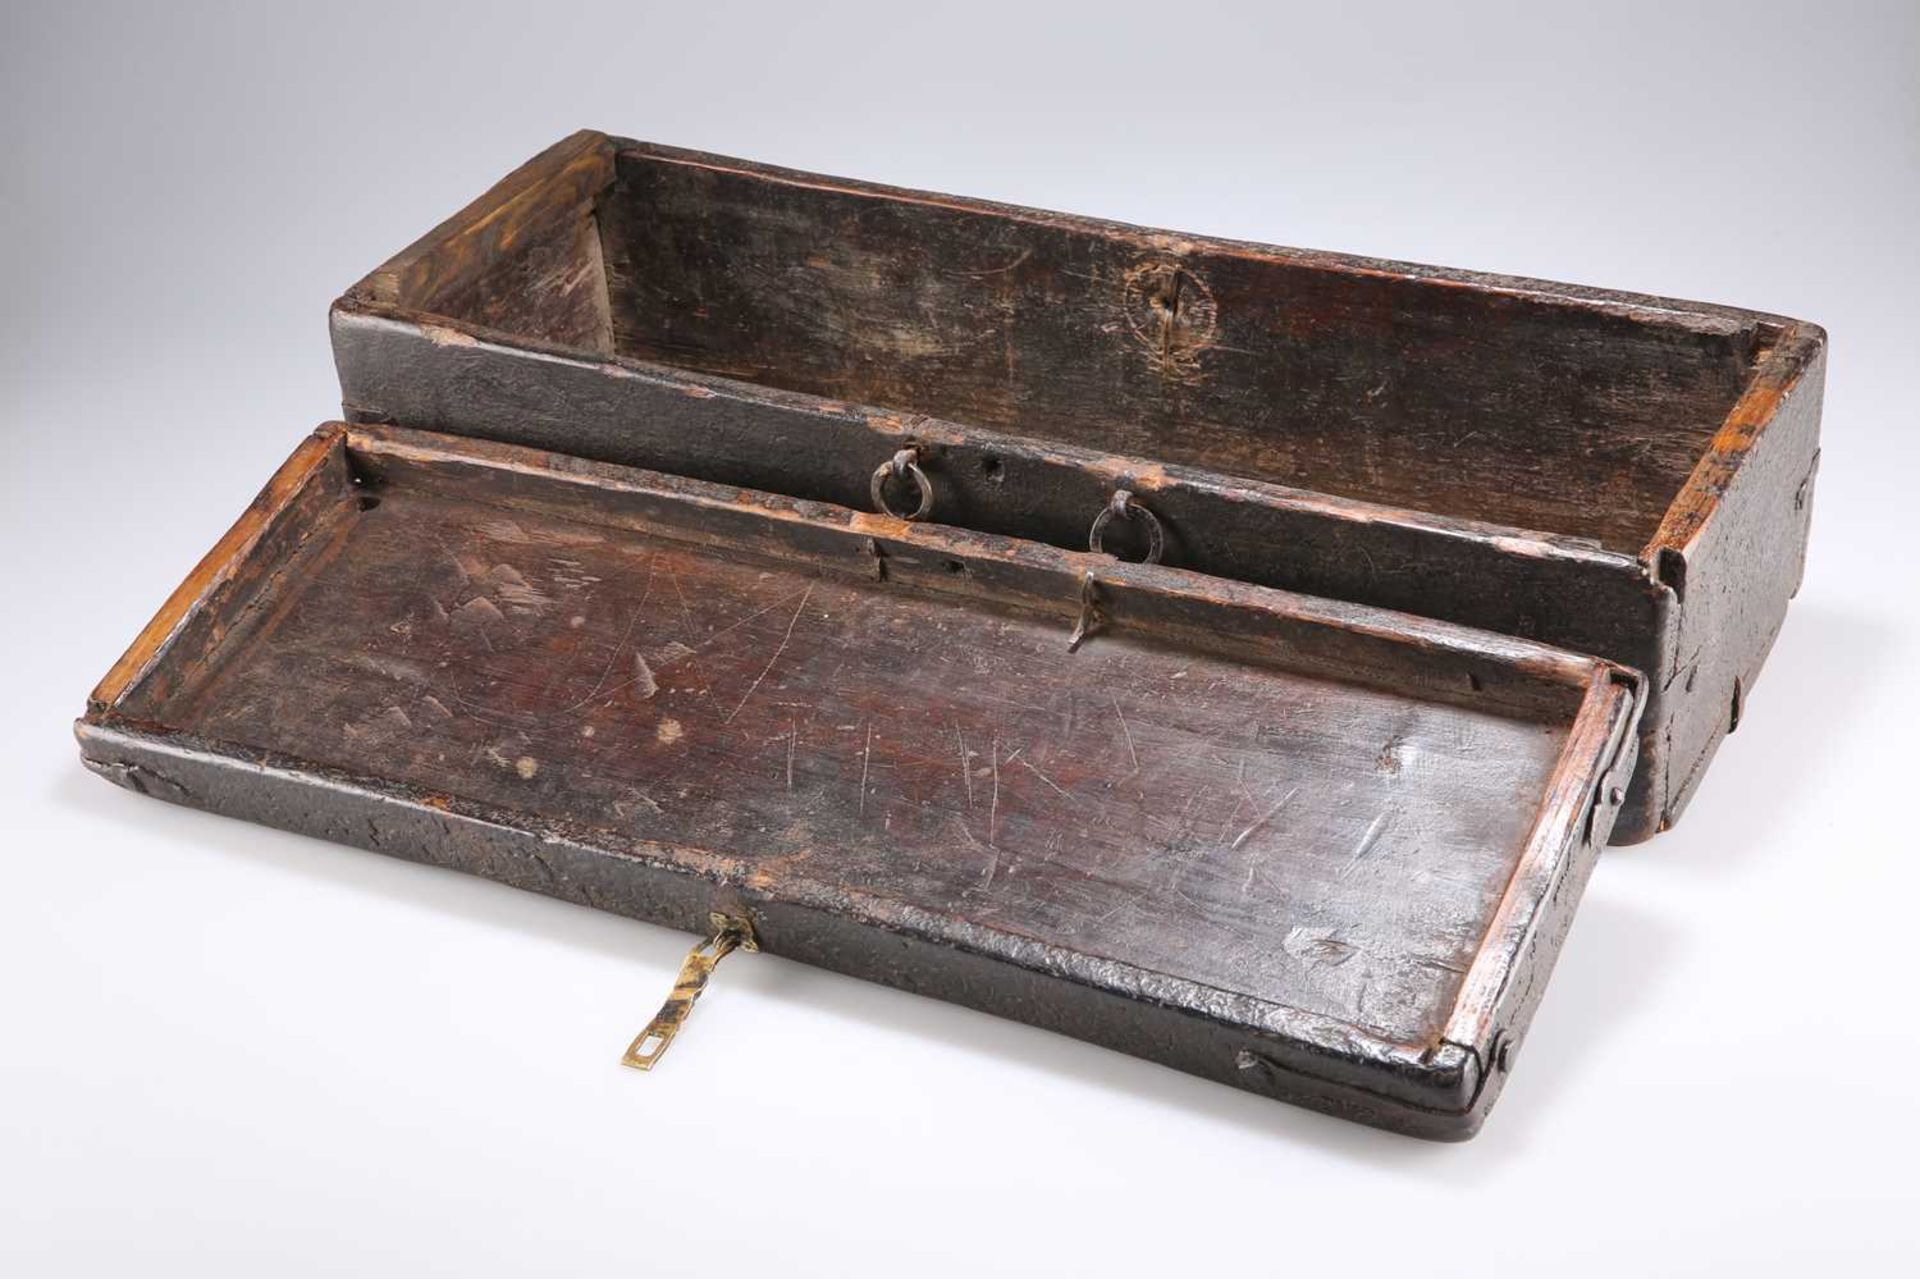 AN 18TH CENTURY PAINTED PINE BOX, POSSIBLY FOR A SCROLL - Image 3 of 3